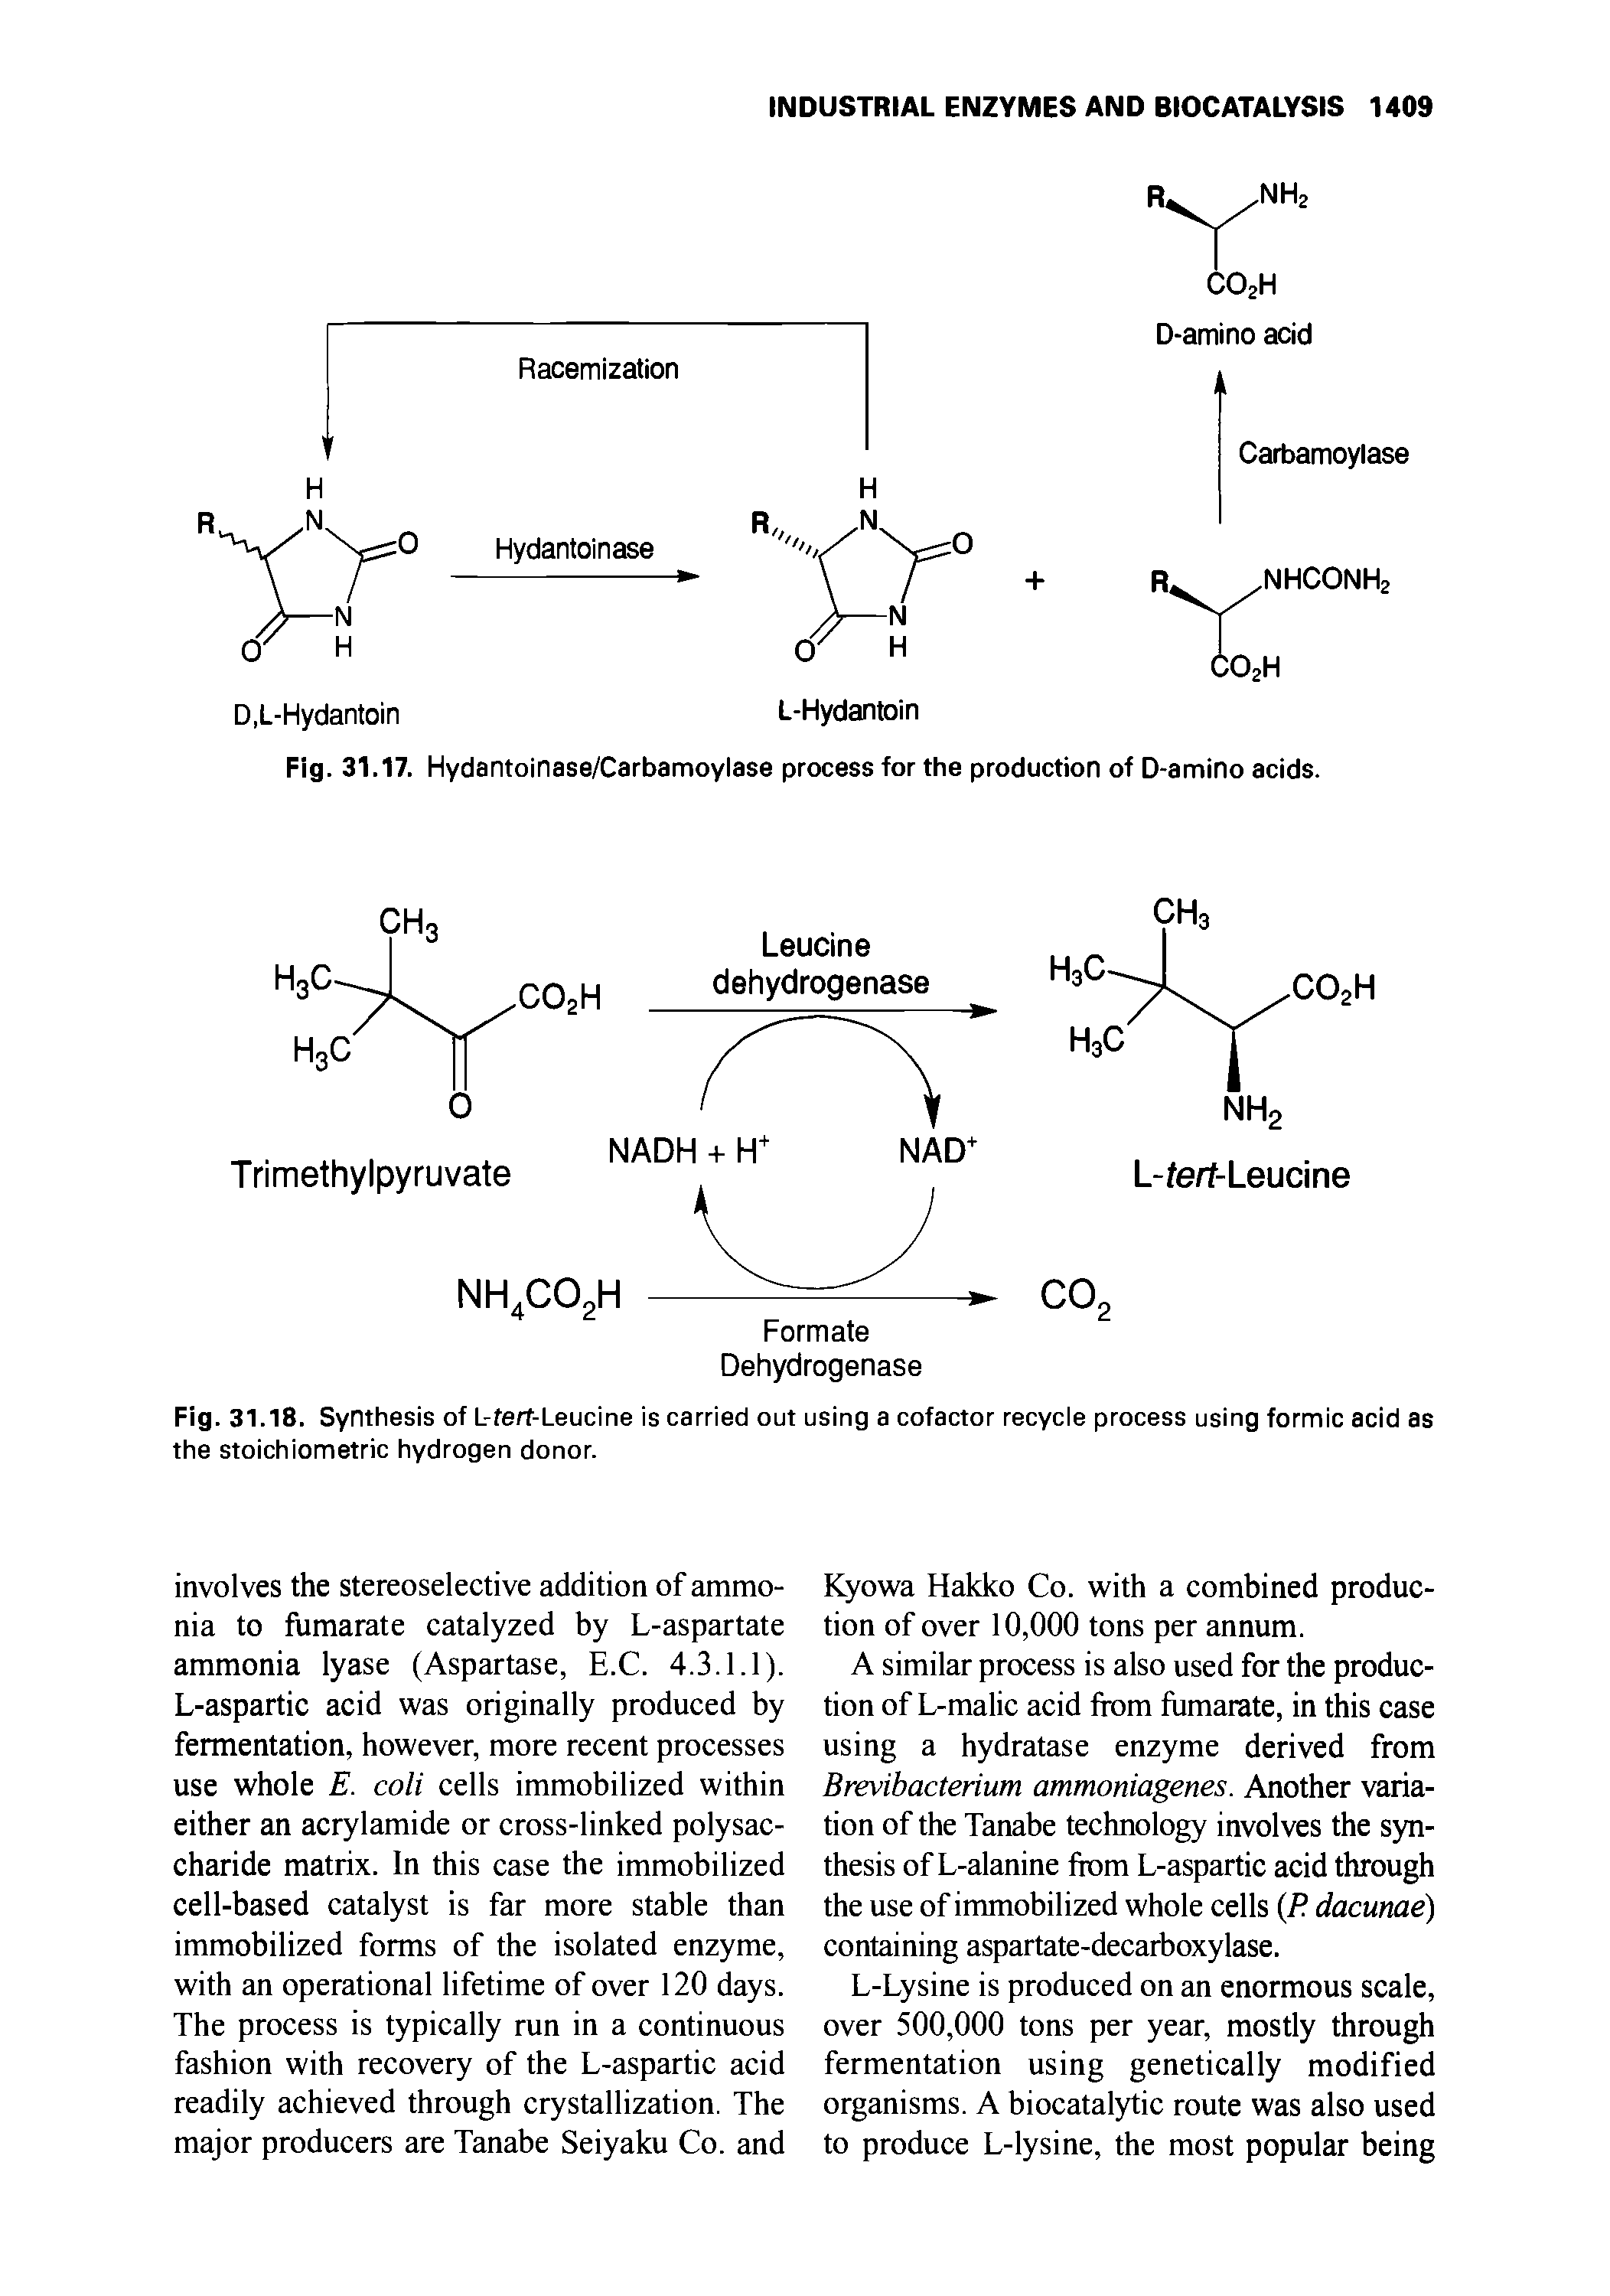 Fig. 31.18. Synthesis of L-fert-Leucine is carried out using a cofactor recycle process using formic acid as the stoichiometric hydrogen donor.